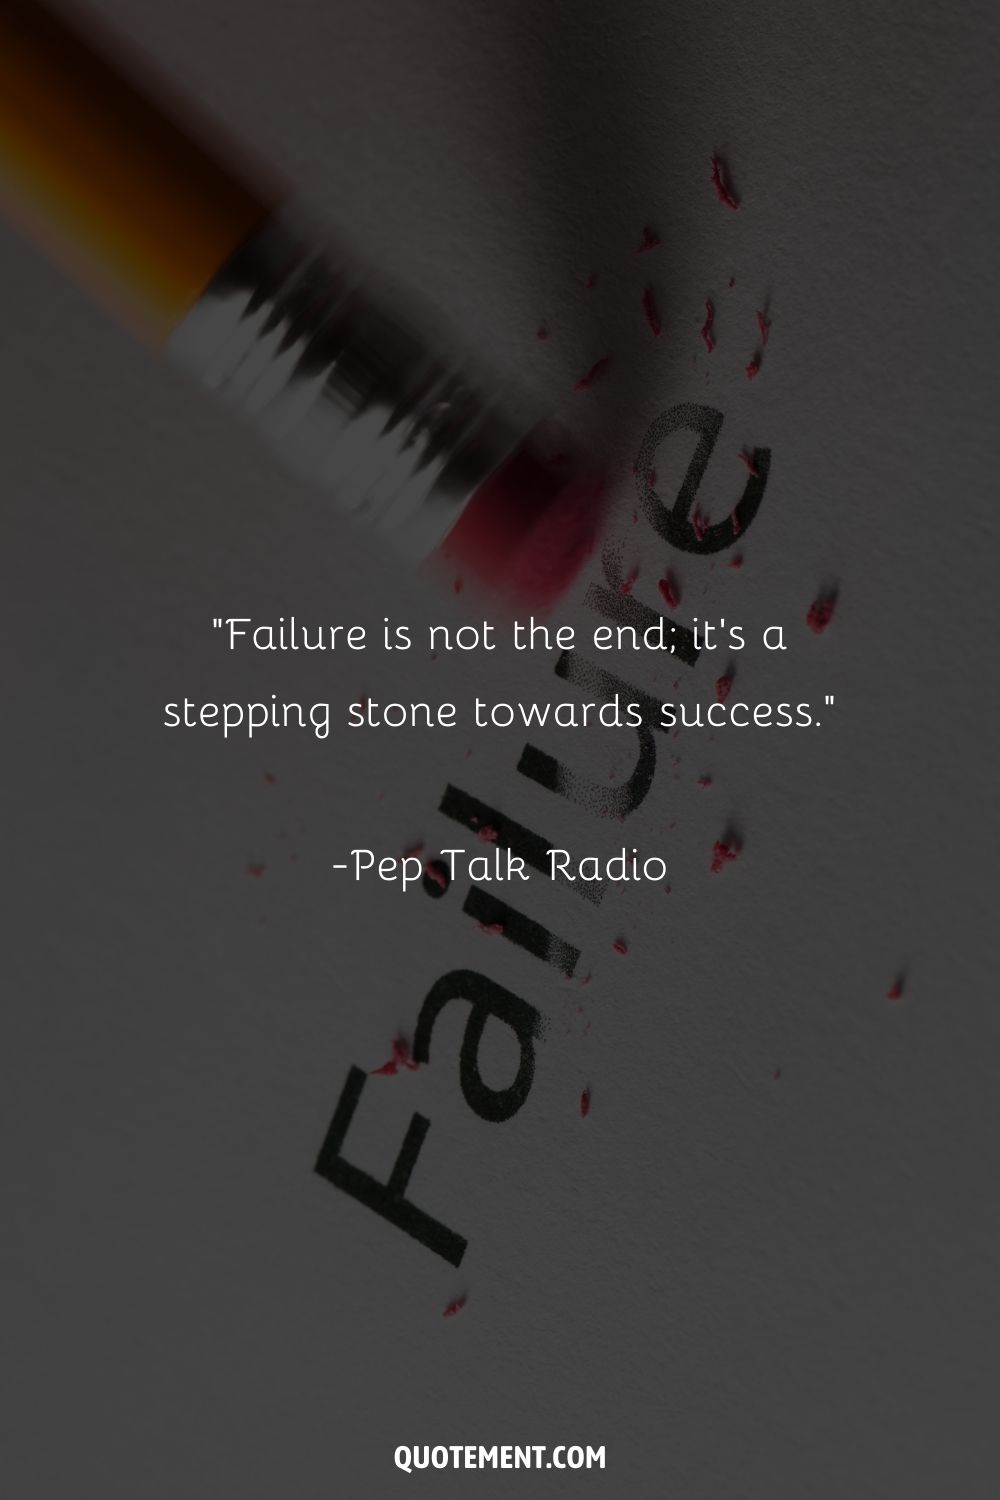 “Failure is not the end; it's a stepping stone towards success.” ― Pep Talk Radio